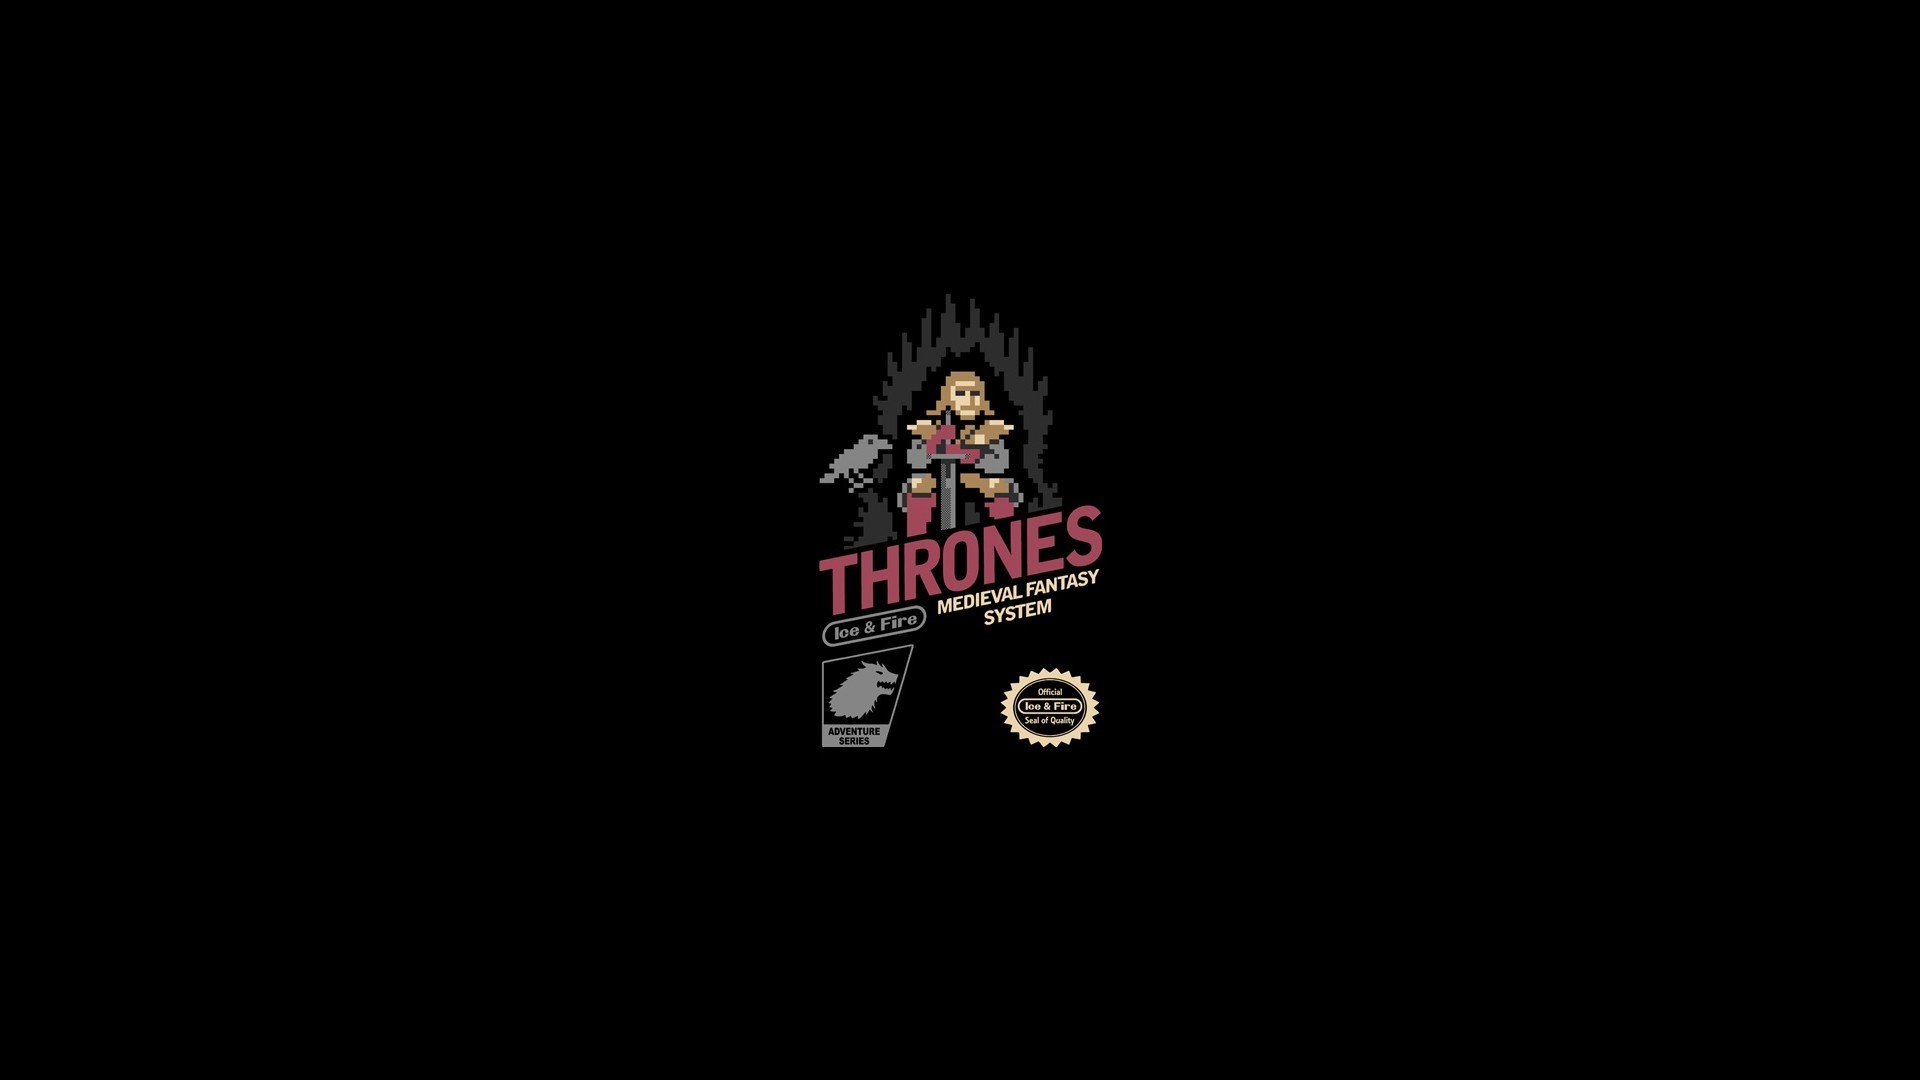 1920x1080 abstract, video, solid, Game of Thrones, 8bit, simplistic, simple .